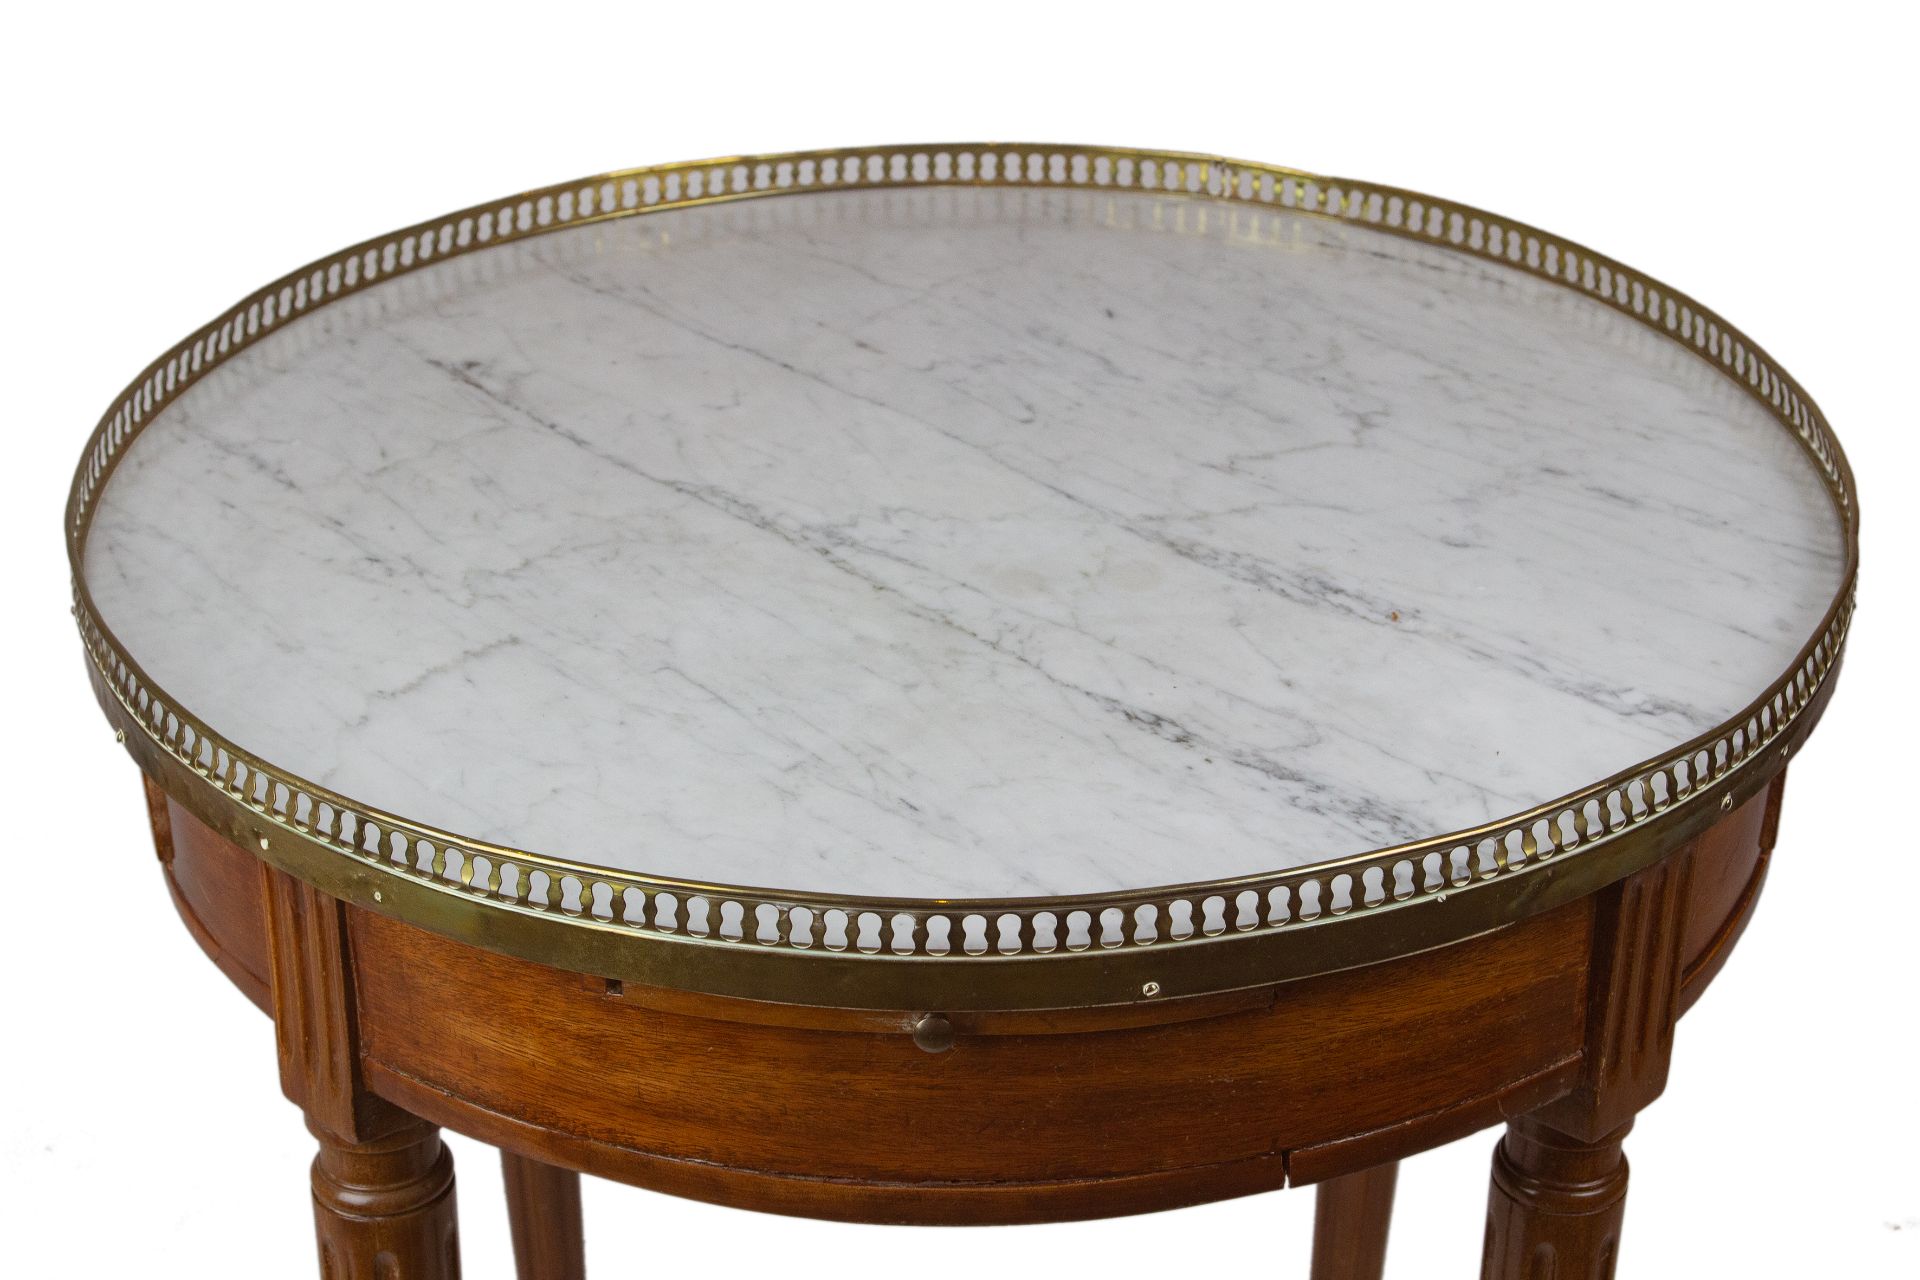 A French Louis XVI style 'bouillotte' walnut table circa 1900 - Image 2 of 3